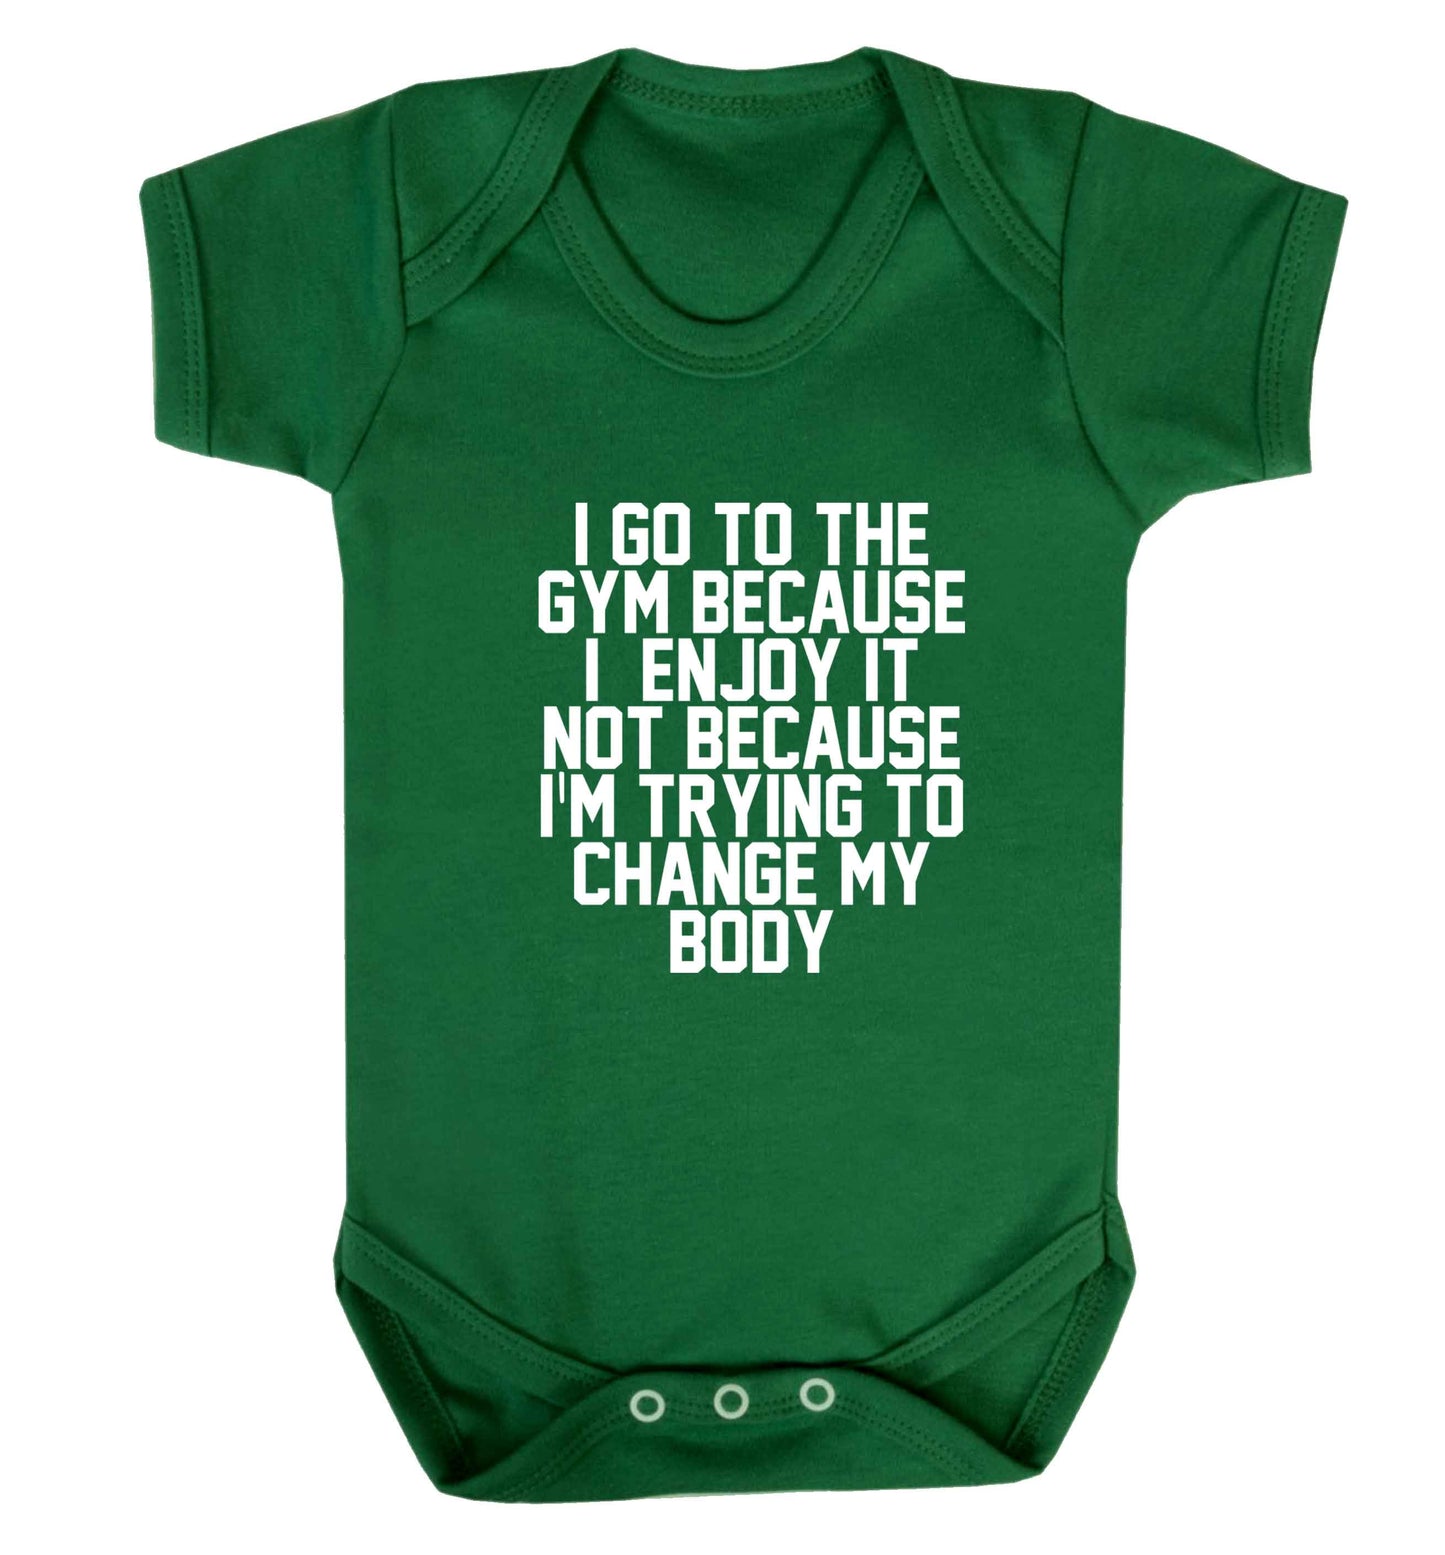 I go to the gym because I enjoy it not because I'm trying to change my body baby vest green 18-24 months